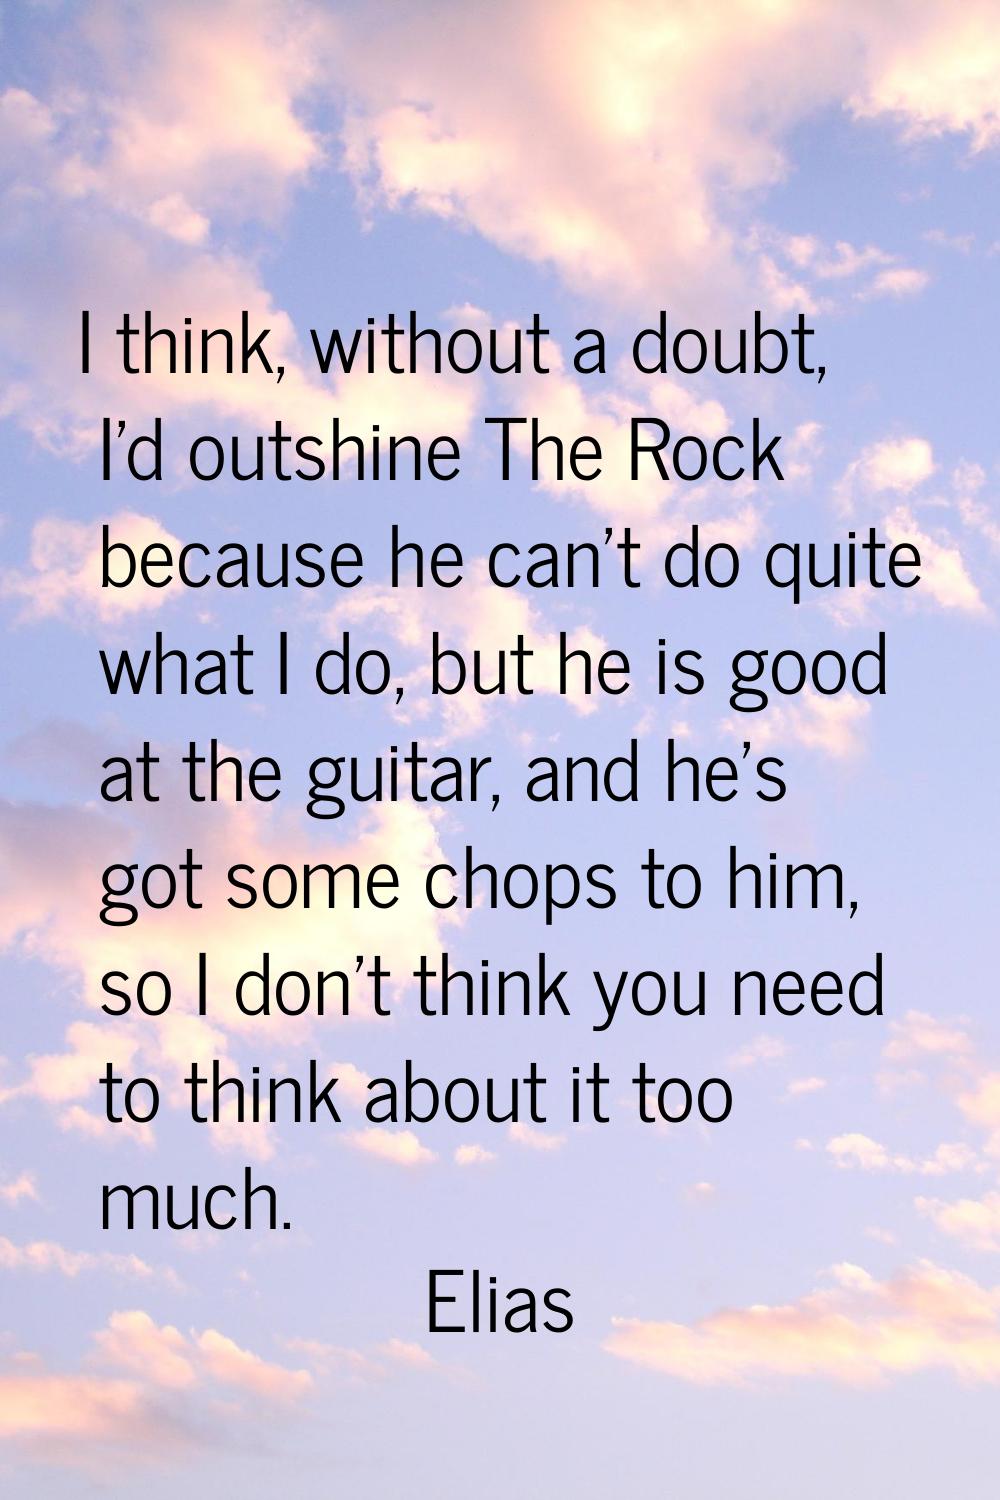 I think, without a doubt, I'd outshine The Rock because he can't do quite what I do, but he is good